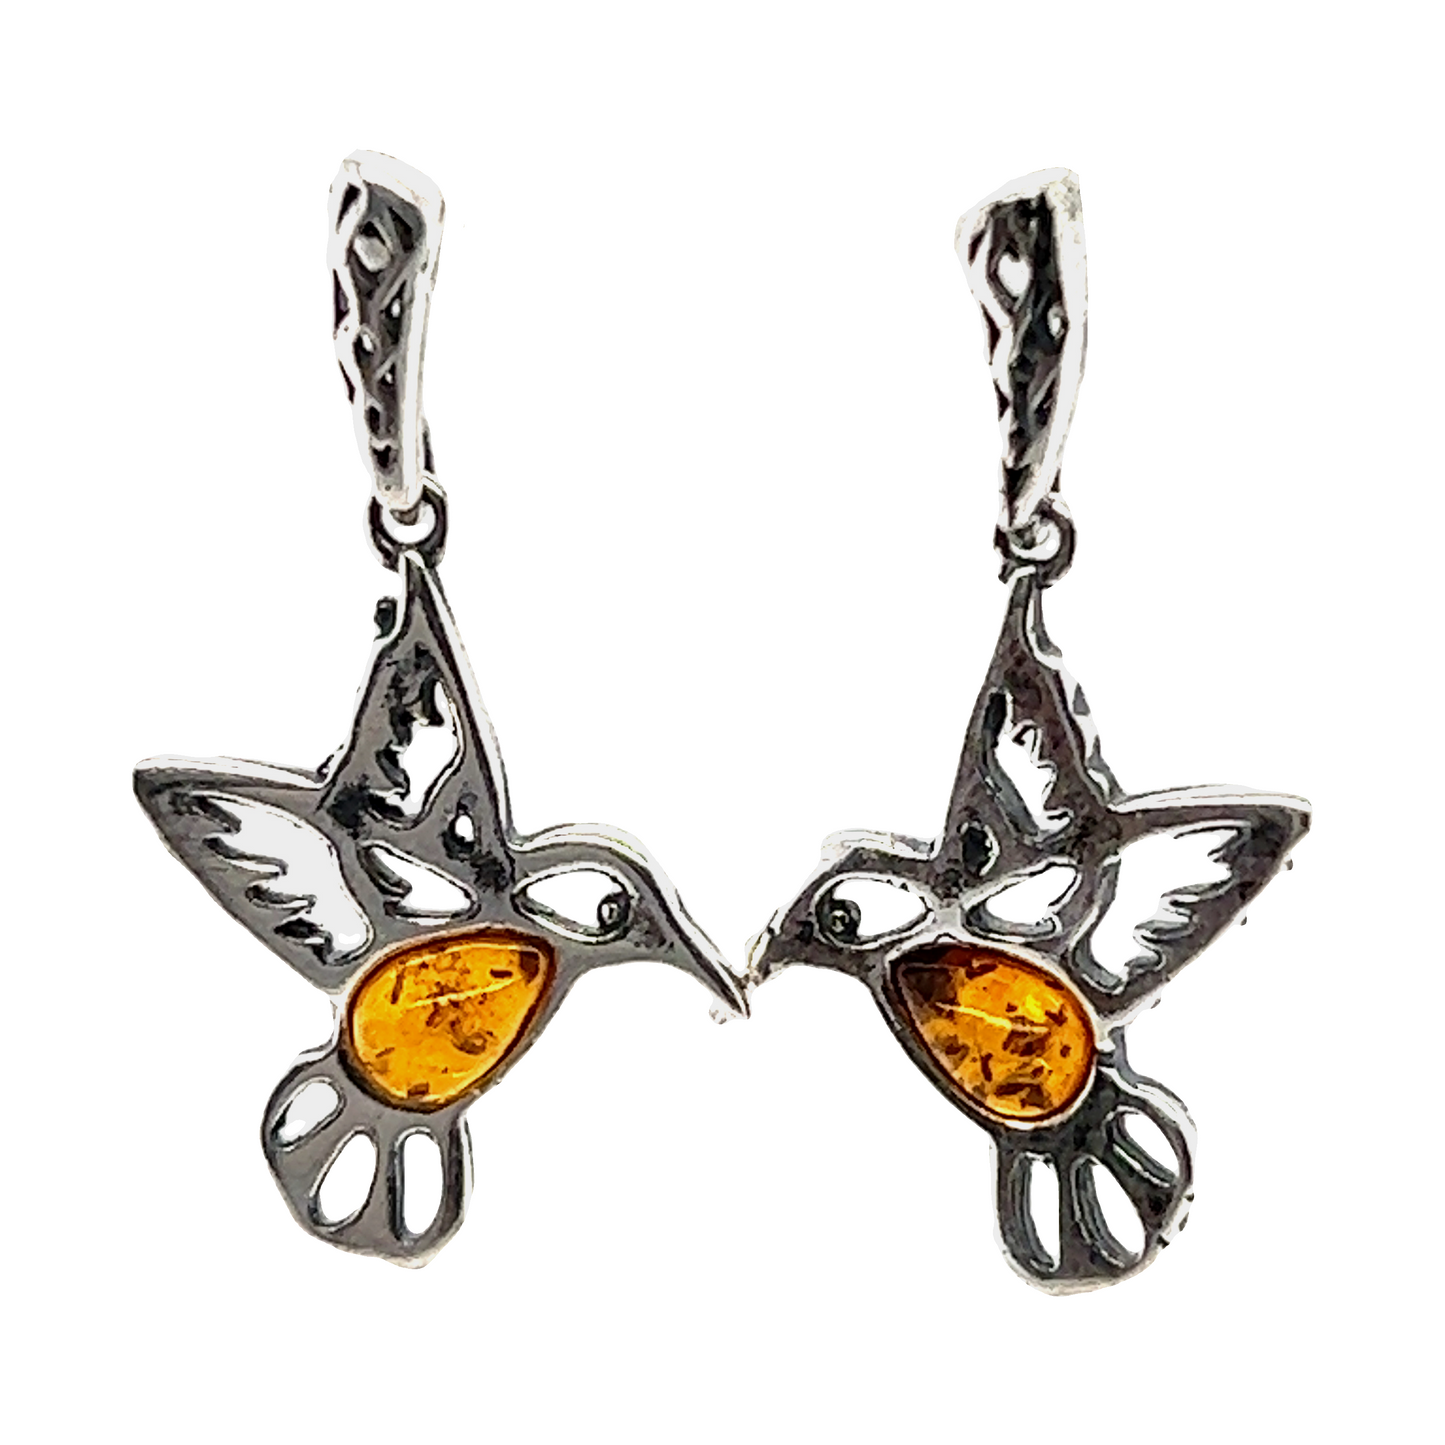 Super Silver Sterling silver Amber Hummingbird earrings in a dangle style.